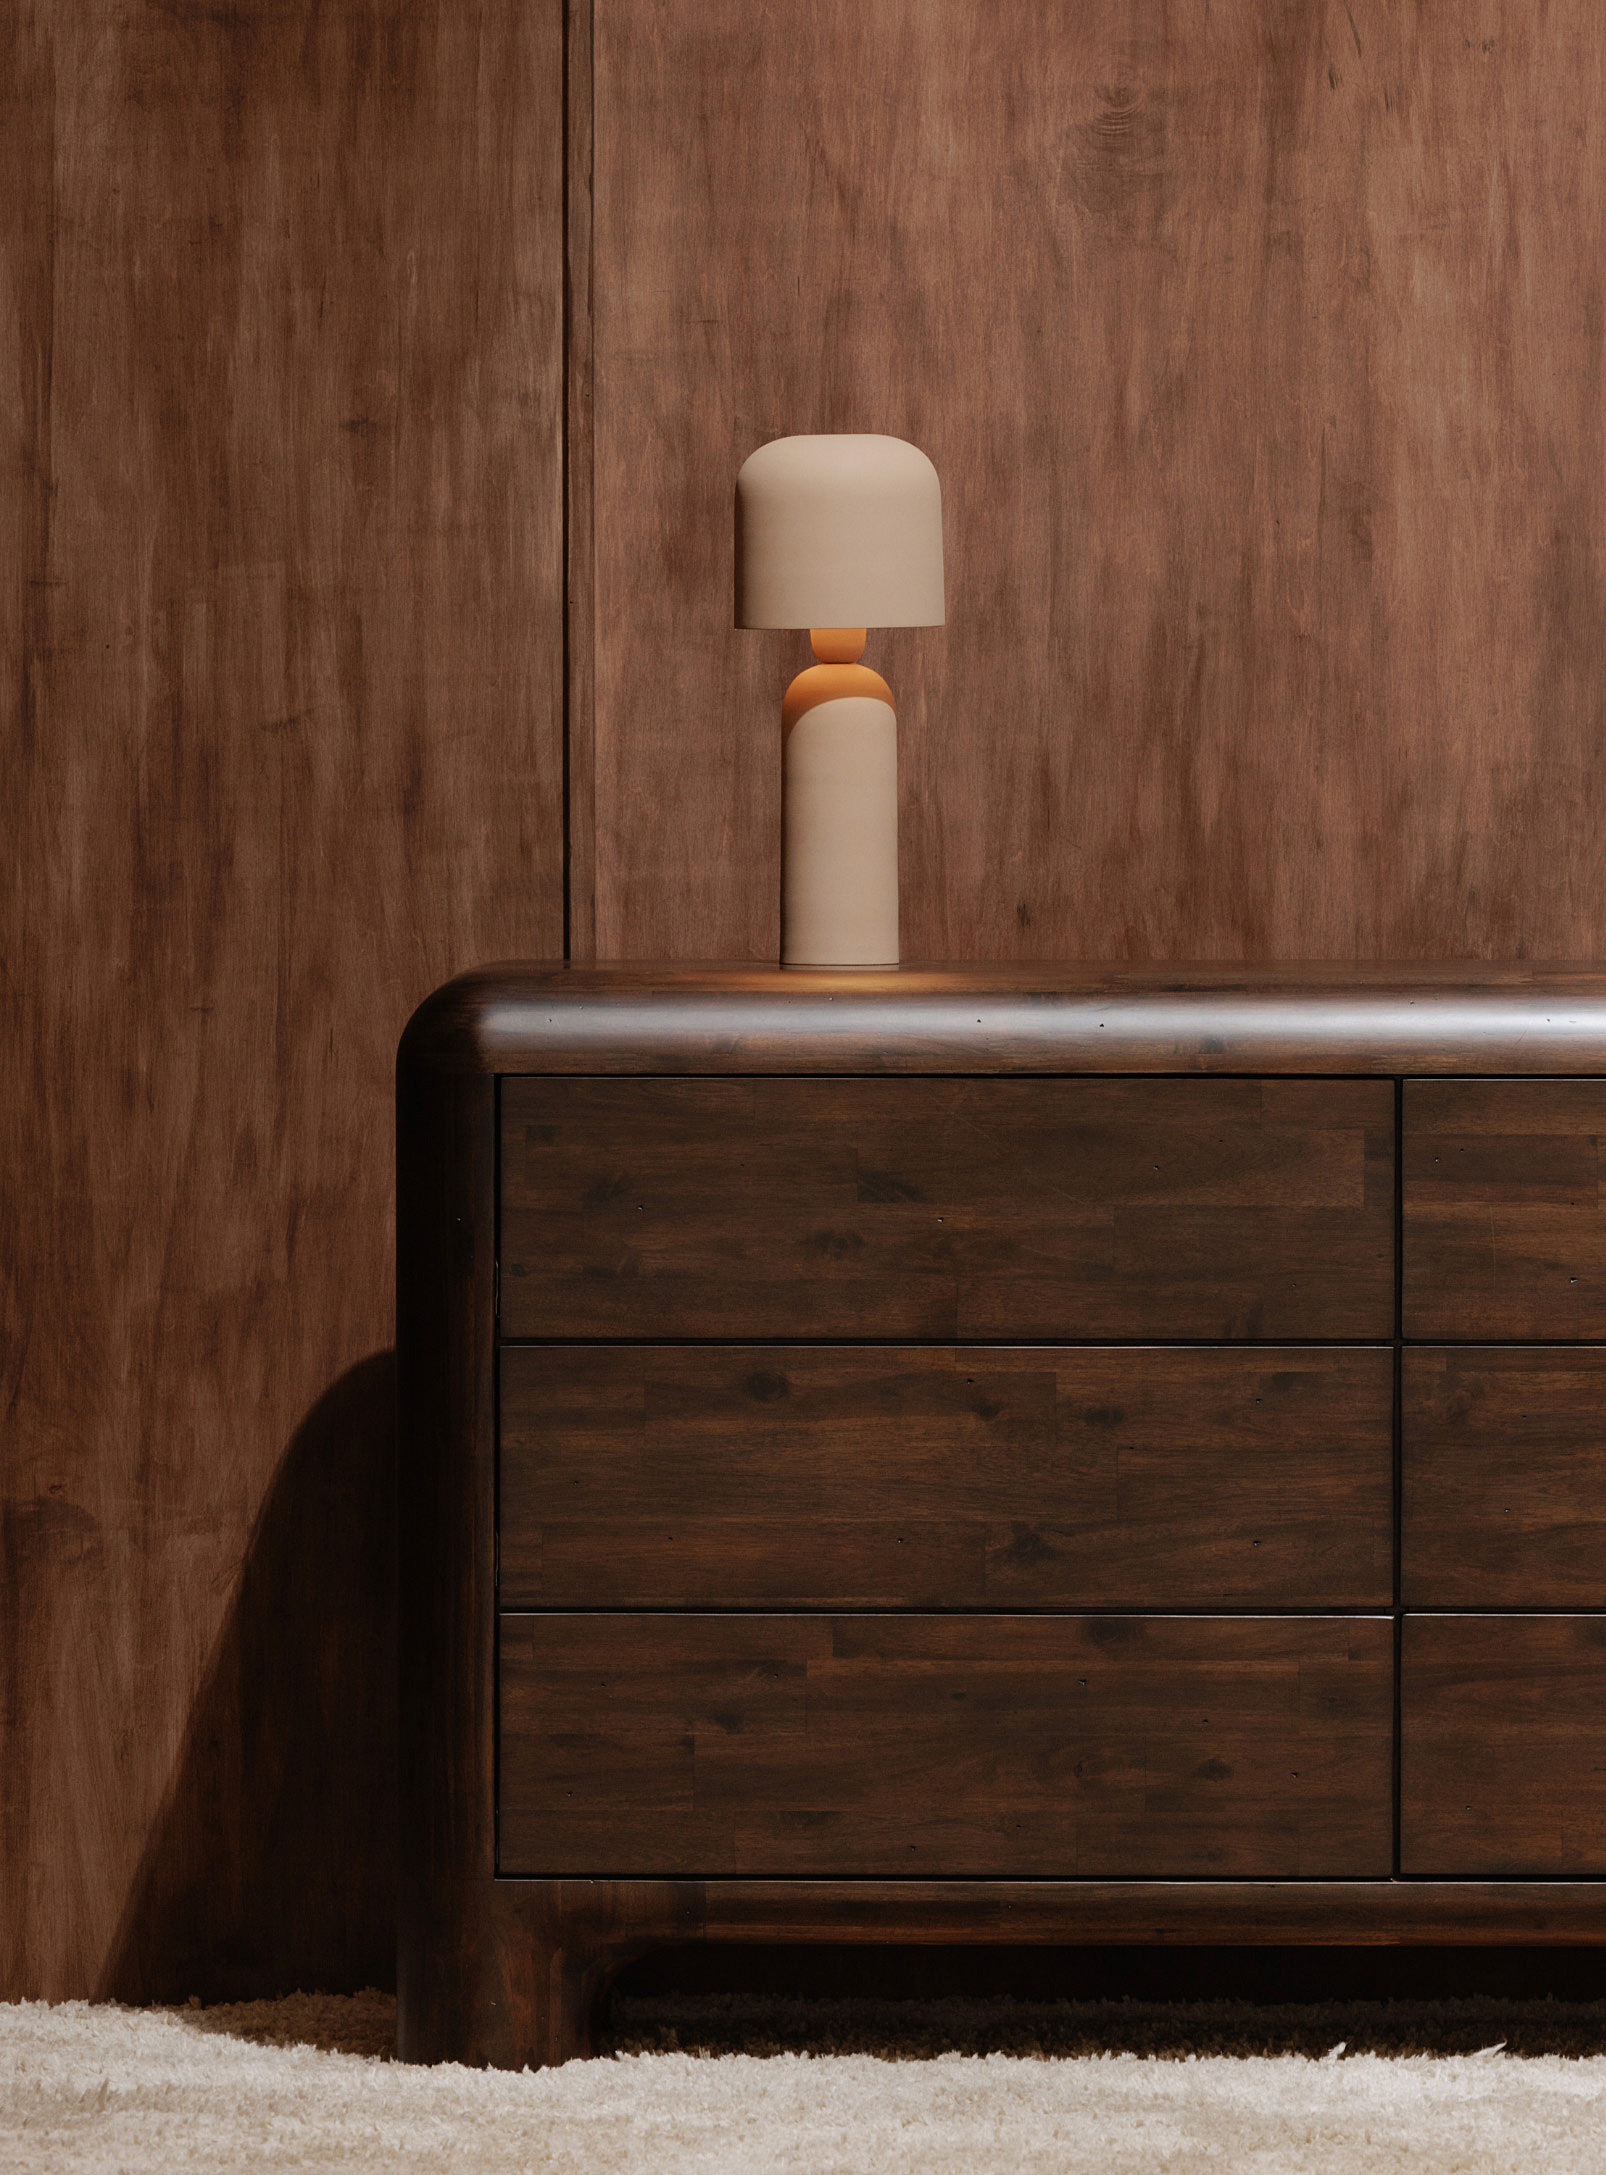 Moe's Home Collection - Echo minimalist table lamp